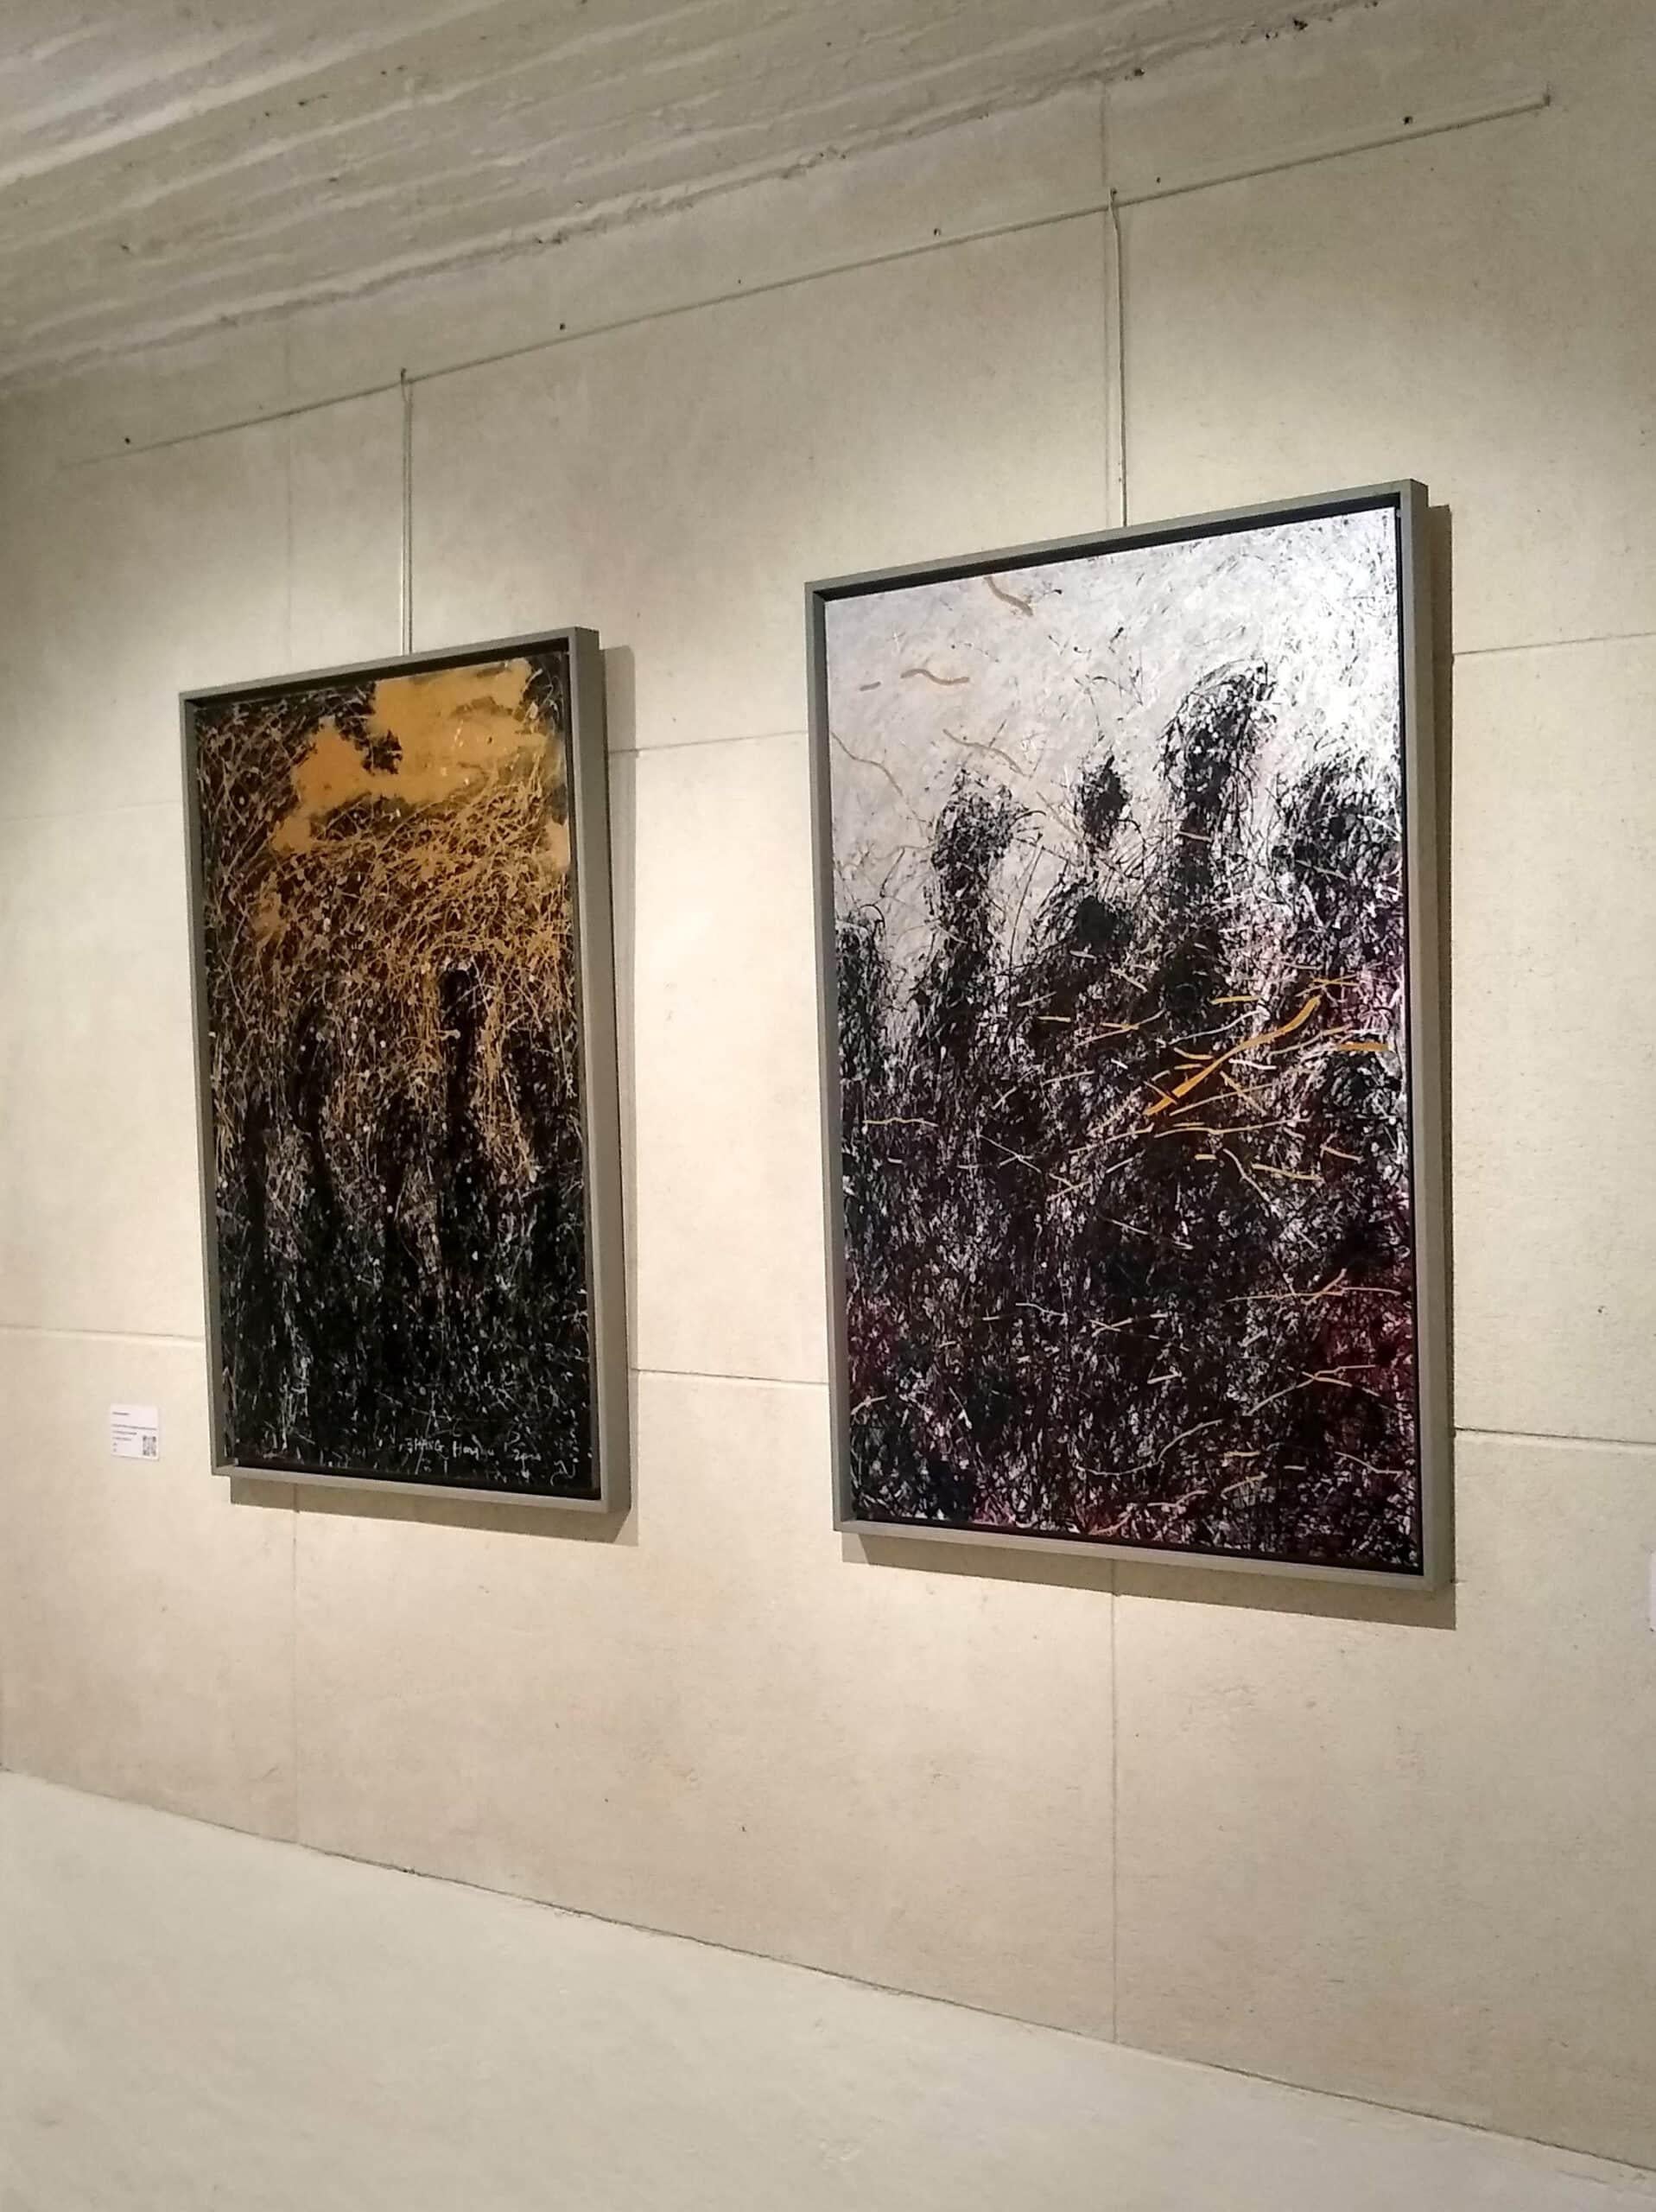 A second 4 is a unique painting by contemporary artist Hongyu Zhang. The painting is made with India ink, acrylic, pastel and engraving on grey cardboard mounted on canvas, dimensions are 92 × 60 cm (36.2 × 23.6 in). Dimensions of the framed artwork